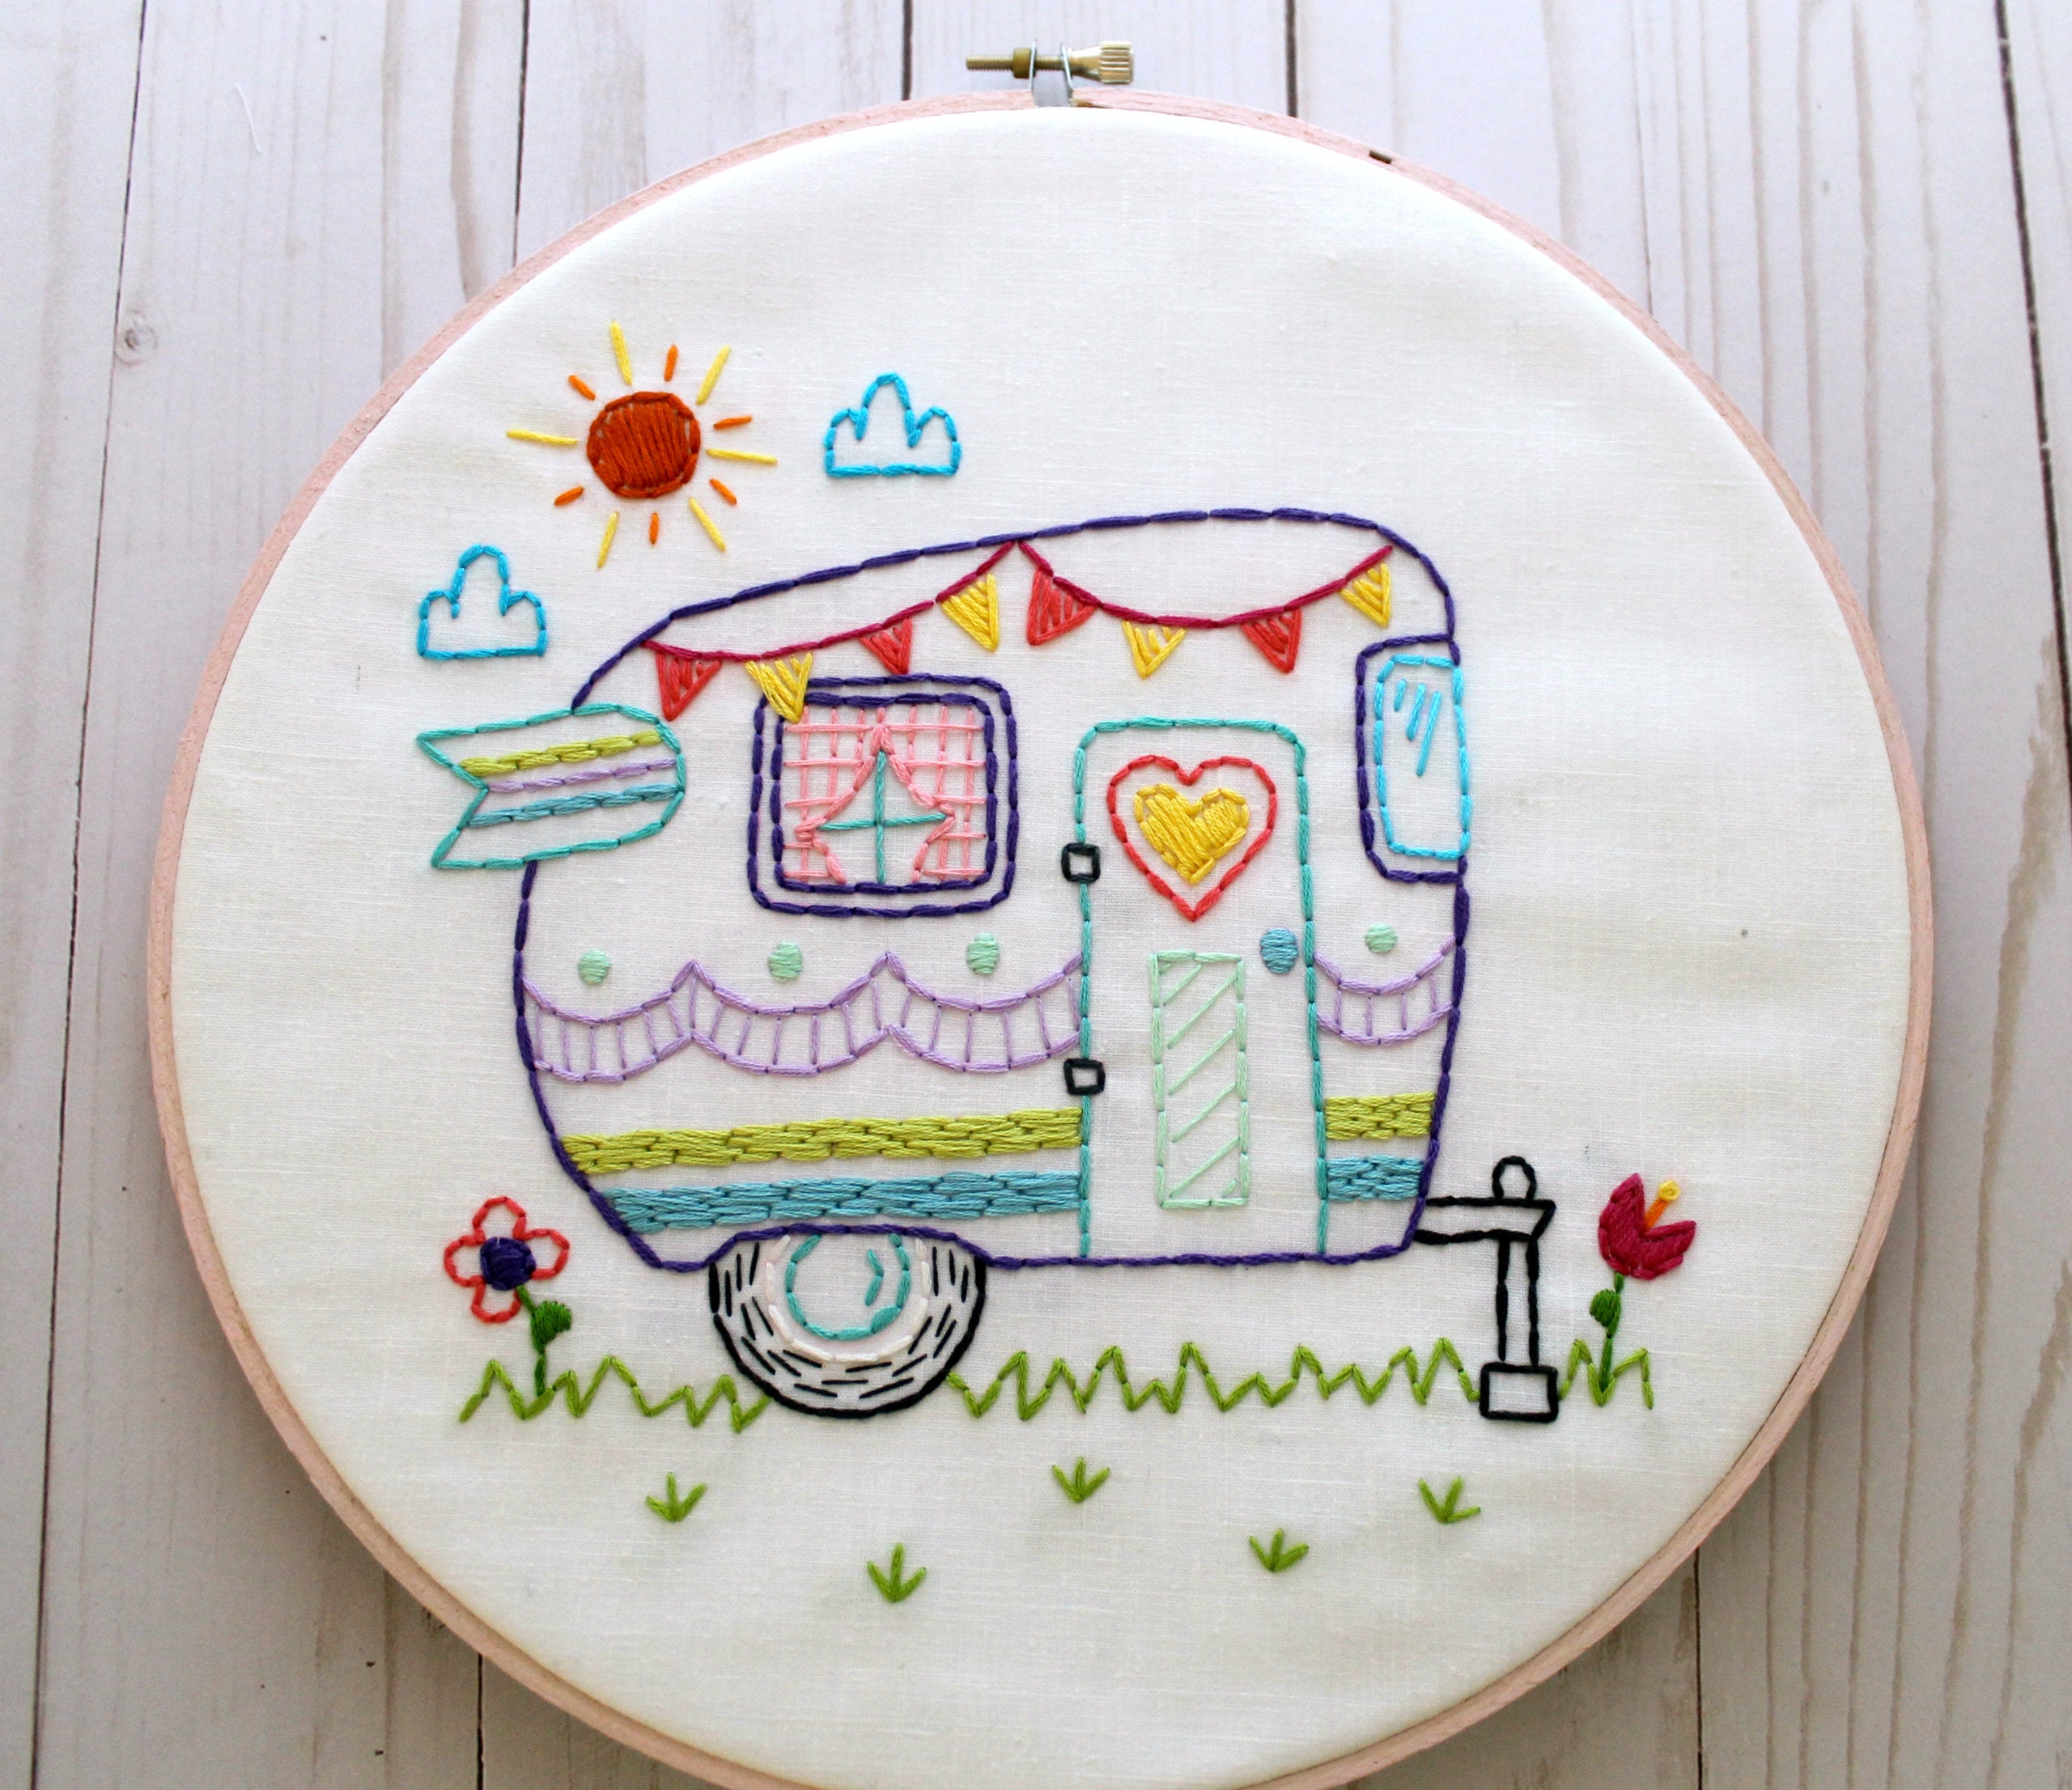 Halloween Hand Embroidery Patterns Retro Camper Hand Embroidery Pattern Pdf Pattern Summer Camping Travel Road Trip Embroidery Designs Vintage Camper Happy Camper